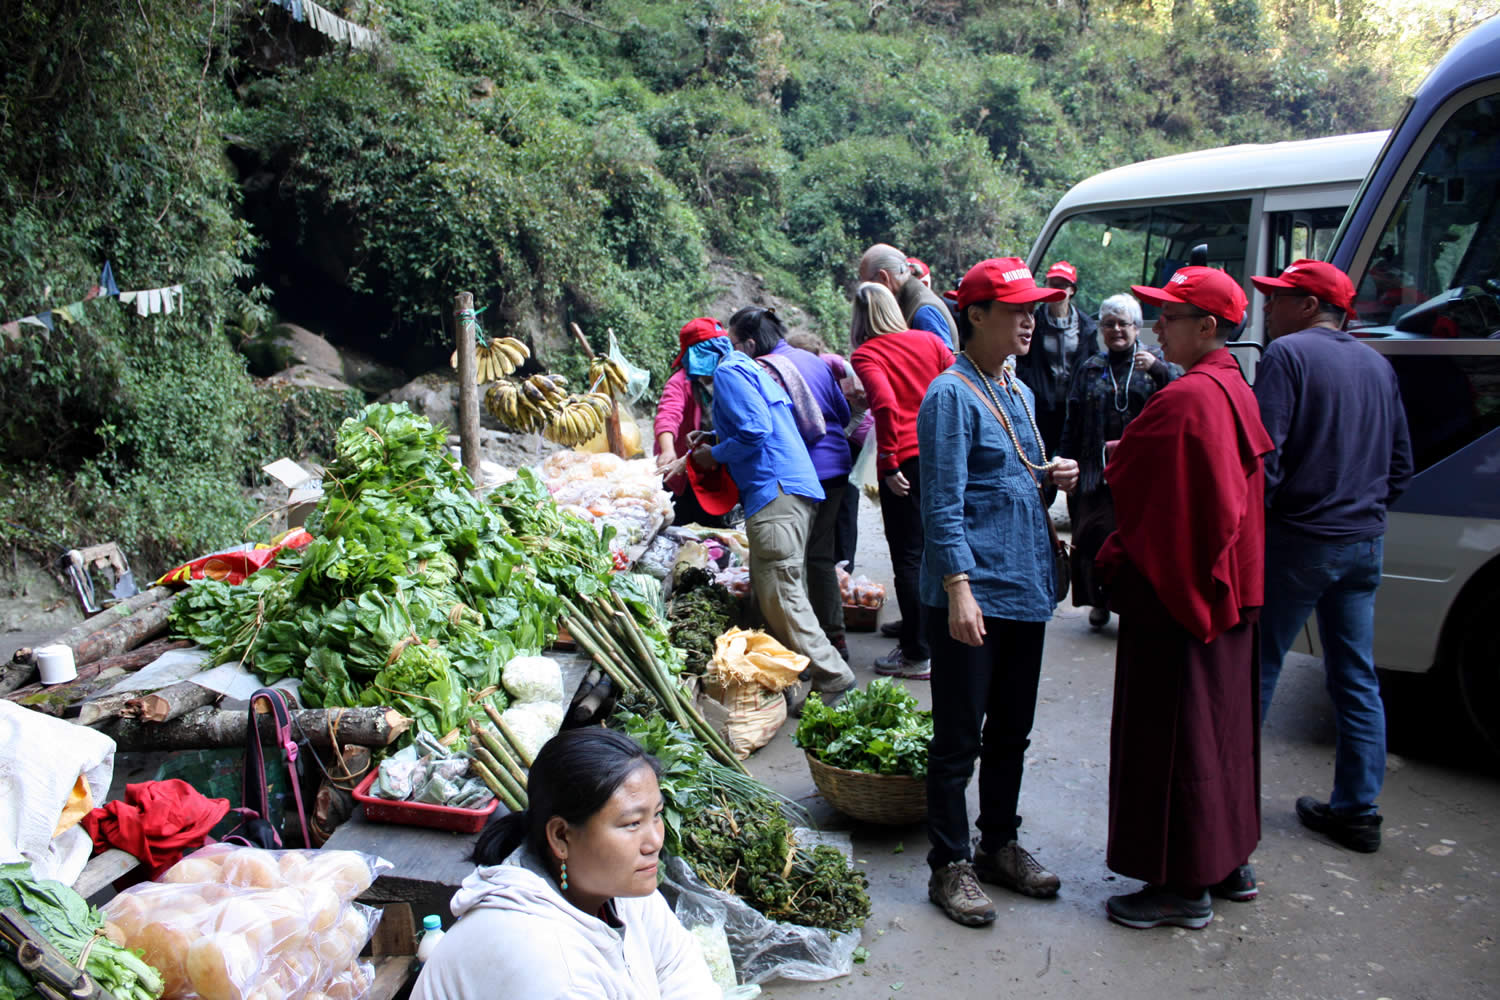 Passengers are delighted to stretch their legs and shop at an all-organic roadside market.